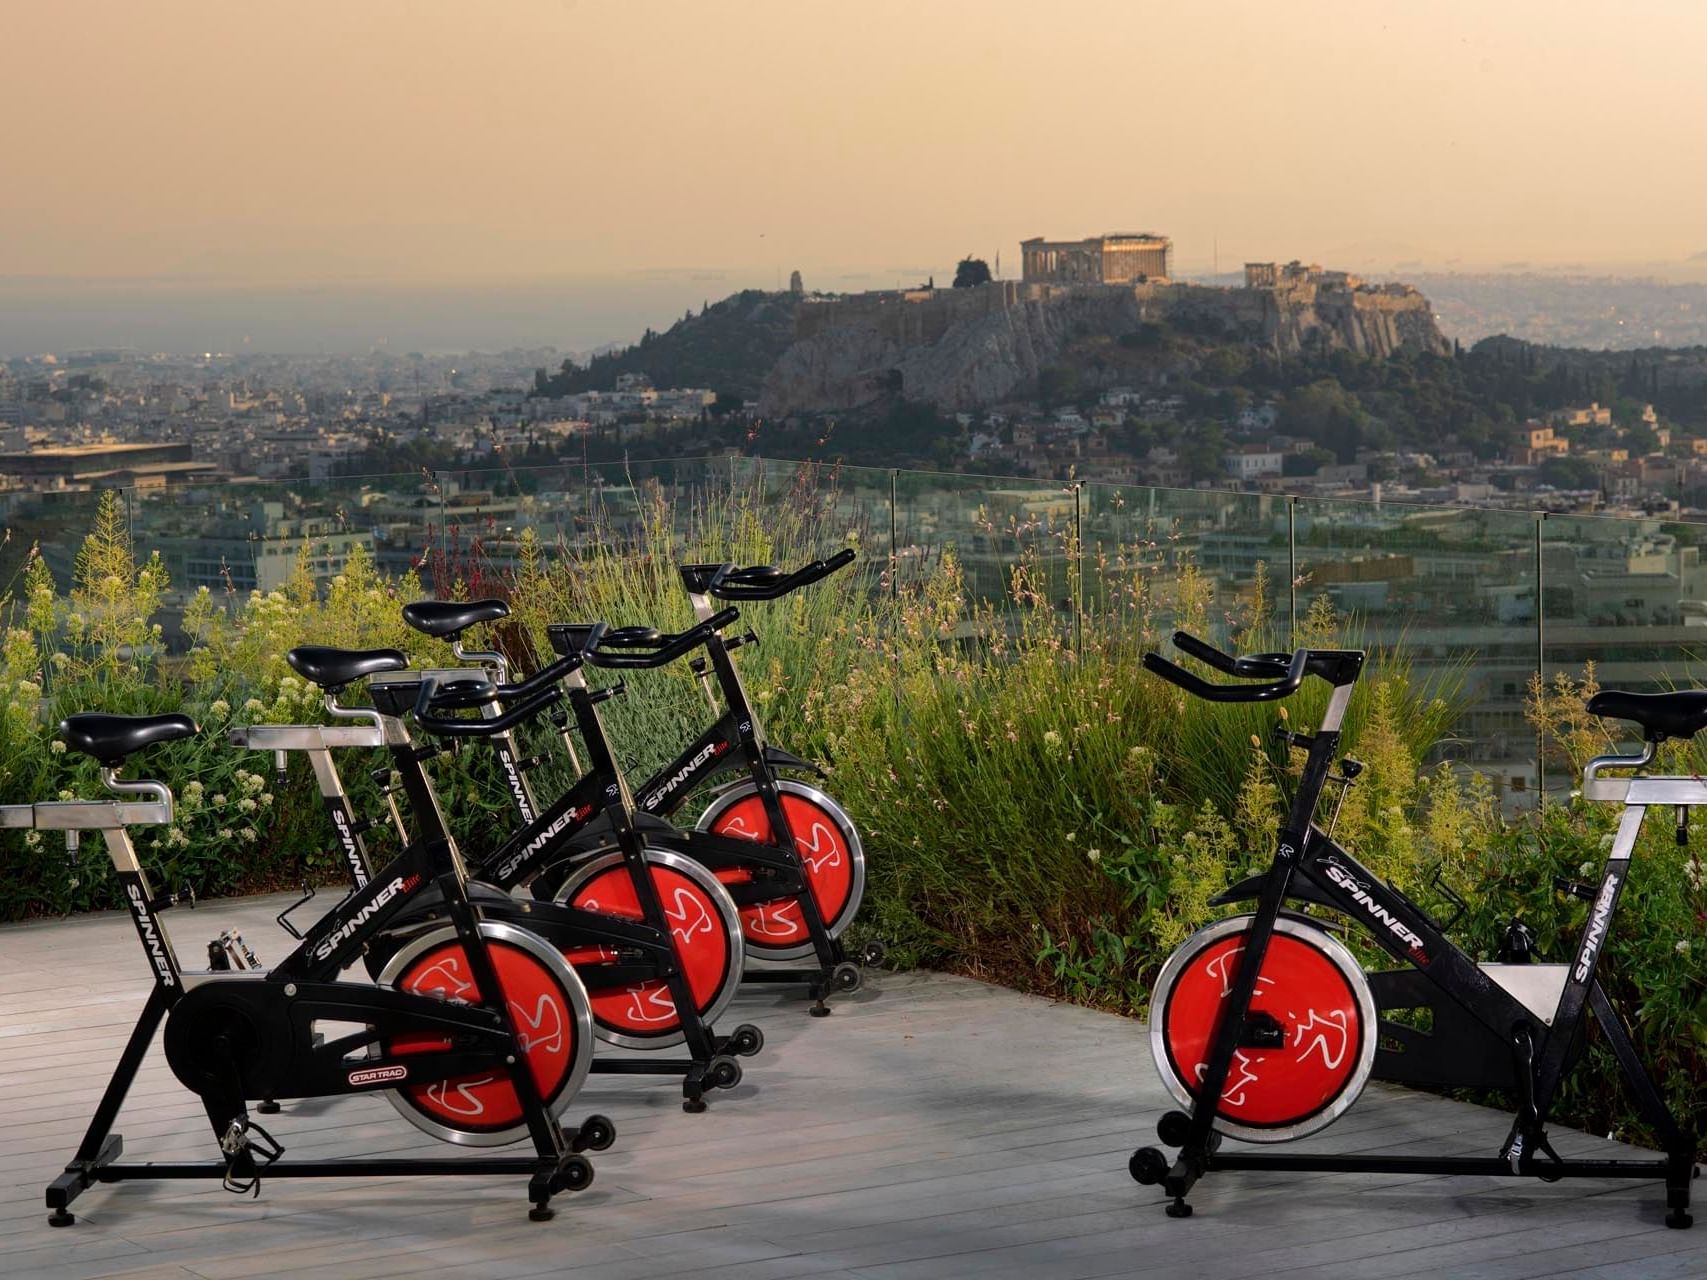 Exercise bikes by city view at St George Lycabettus